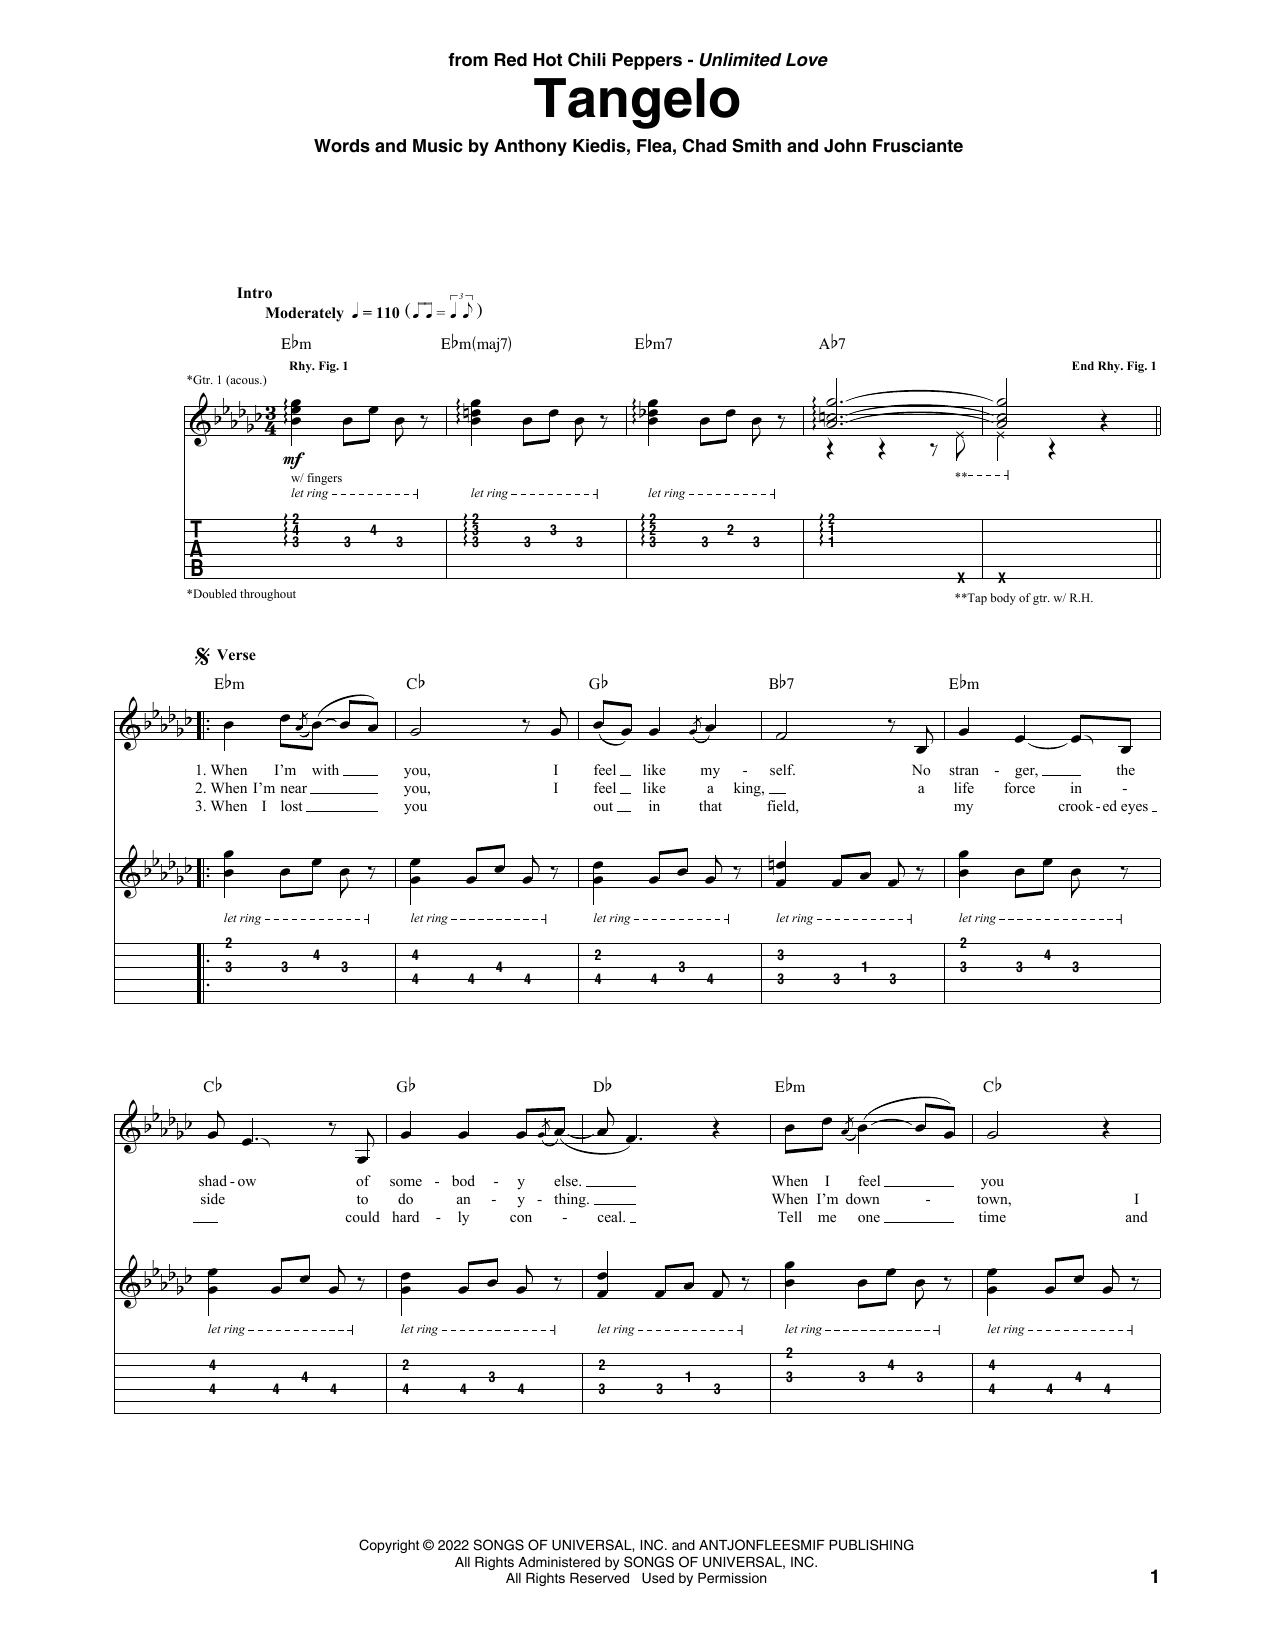 Download Red Hot Chili Peppers Tangelo Sheet Music